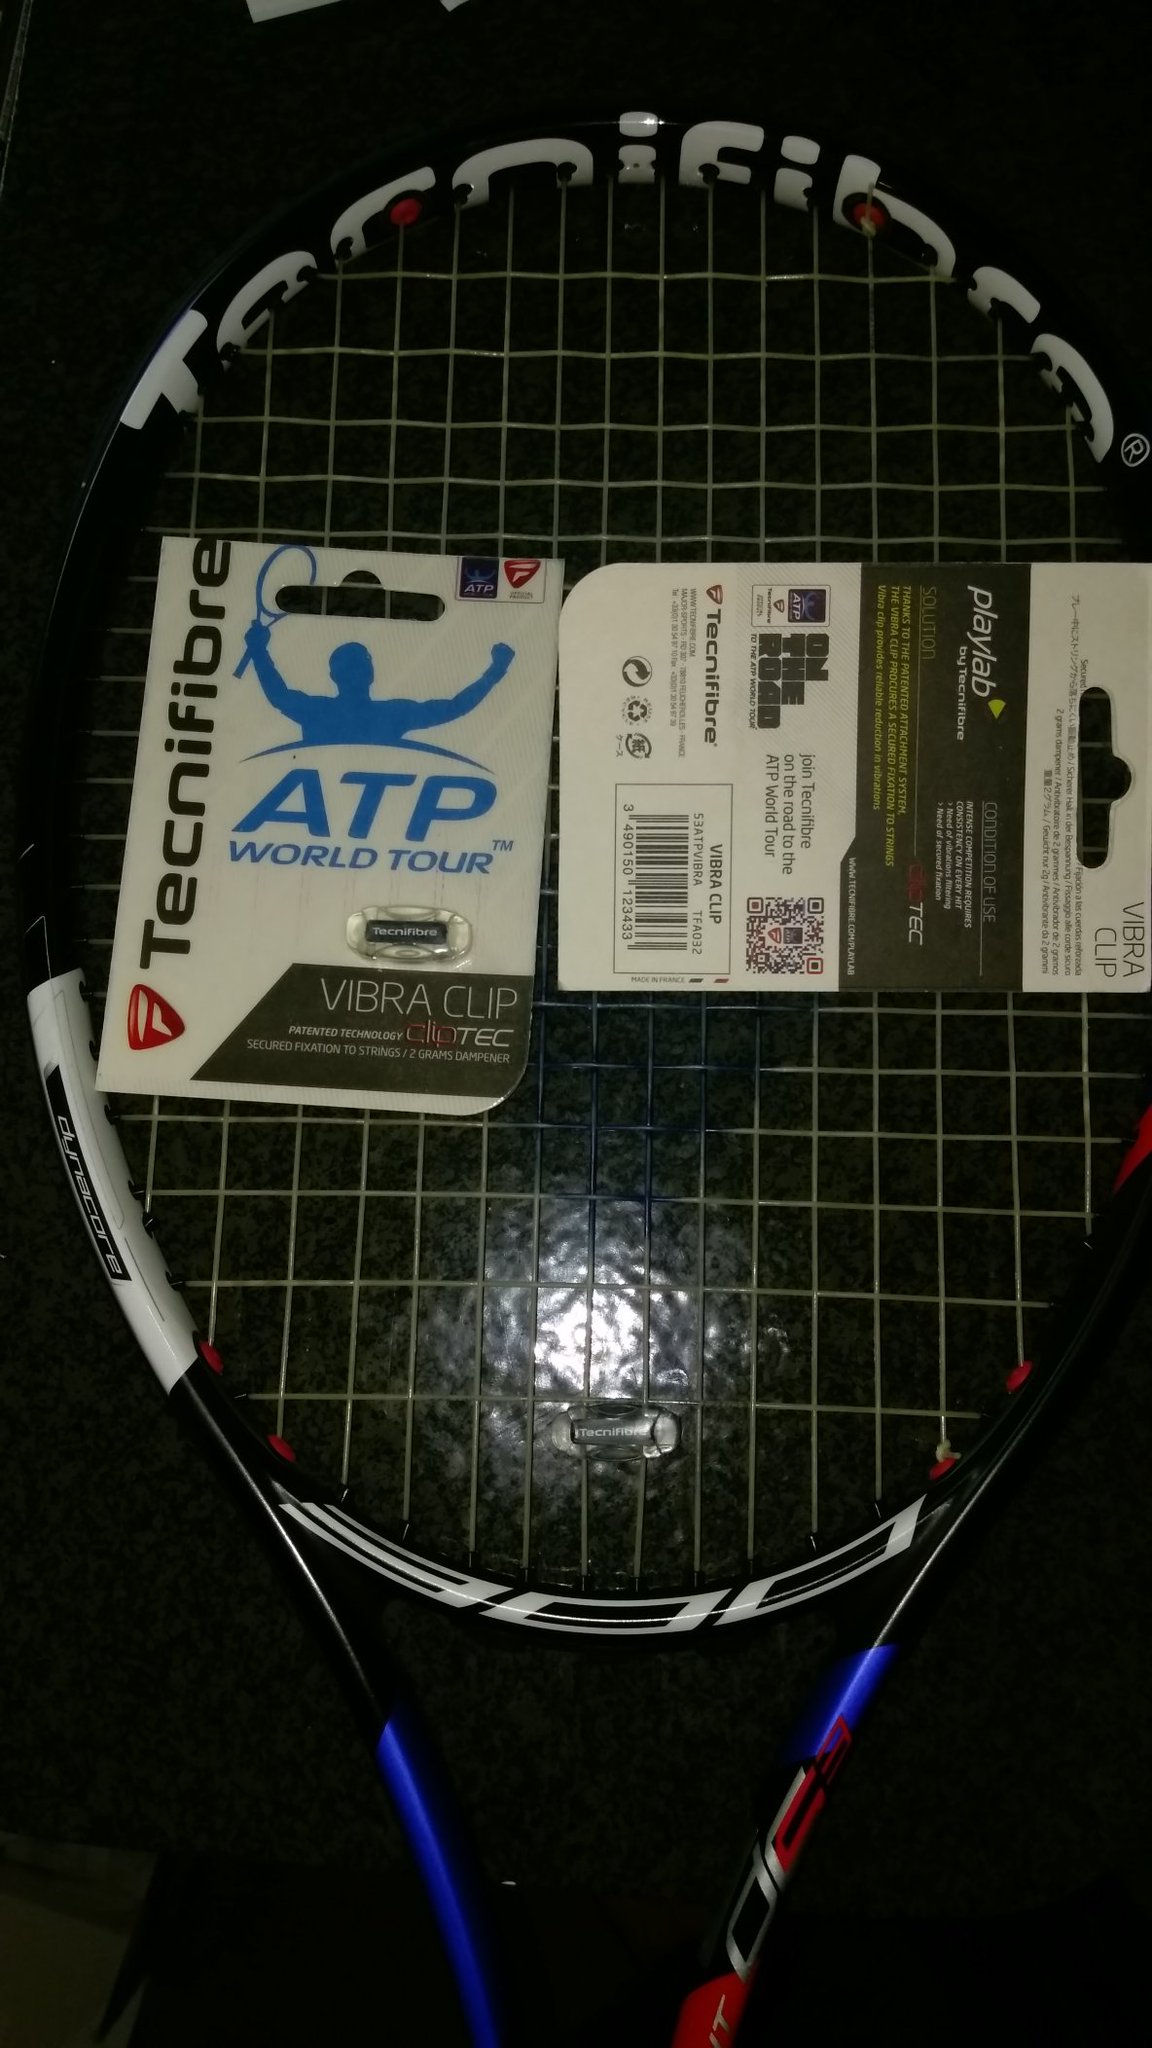 Robb Julian on Twitter: "Got my Tight DC 300 strung up with X-One Biphase  18. The finishing touch: Vibra Clip. The only dampener in the world made in  France. Tecnifibre even makes